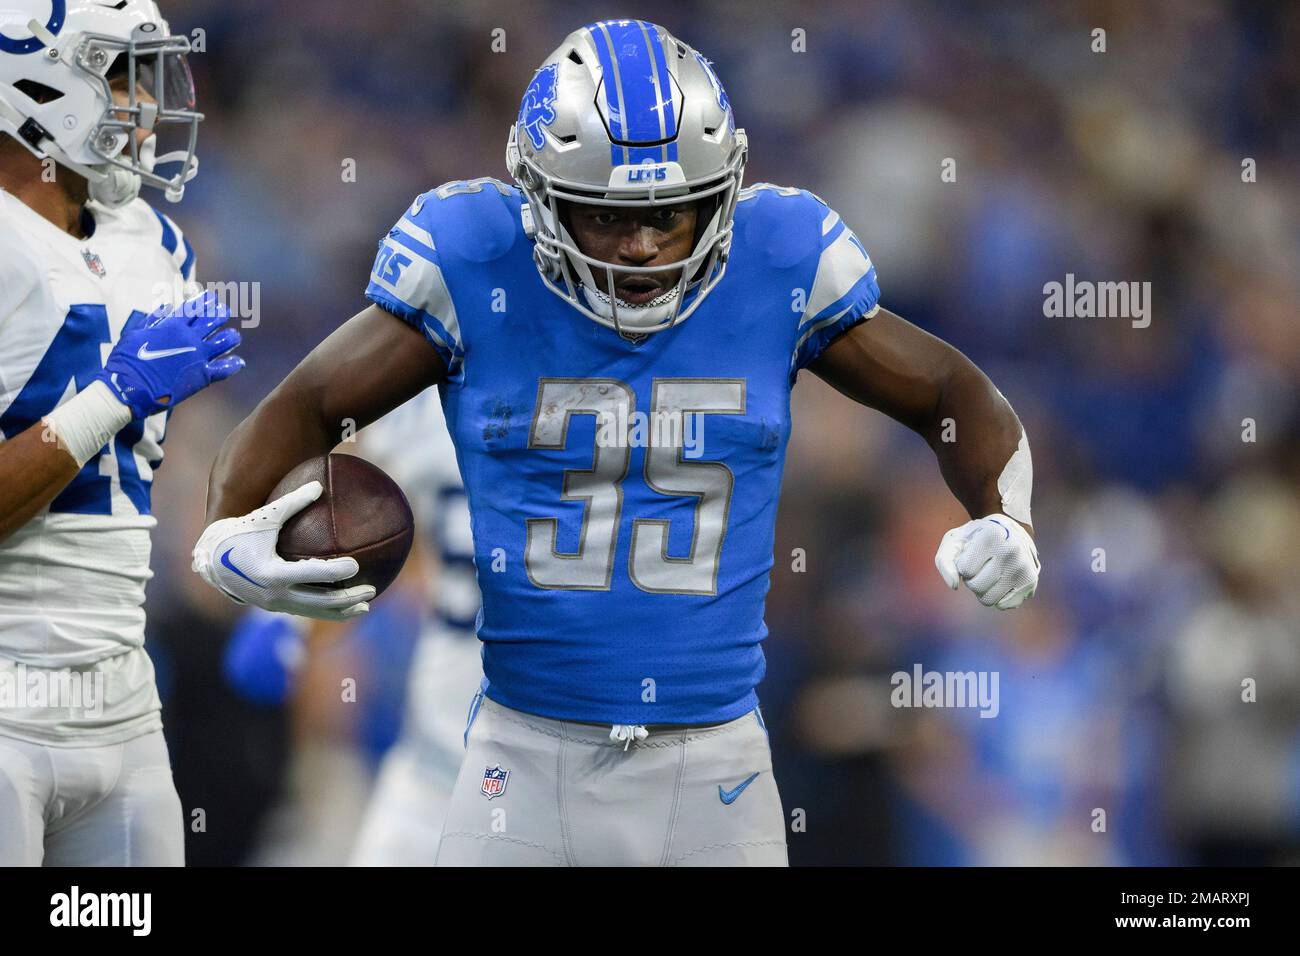 Detroit Lions running back Godwin Igwebuike (35) celebrates after a long  run during an NFL football game against the Indianapolis Colts, Saturday,  Aug. 20, 2022, in Indianapolis. (AP Photo/Zach Bolinger Stock Photo - Alamy